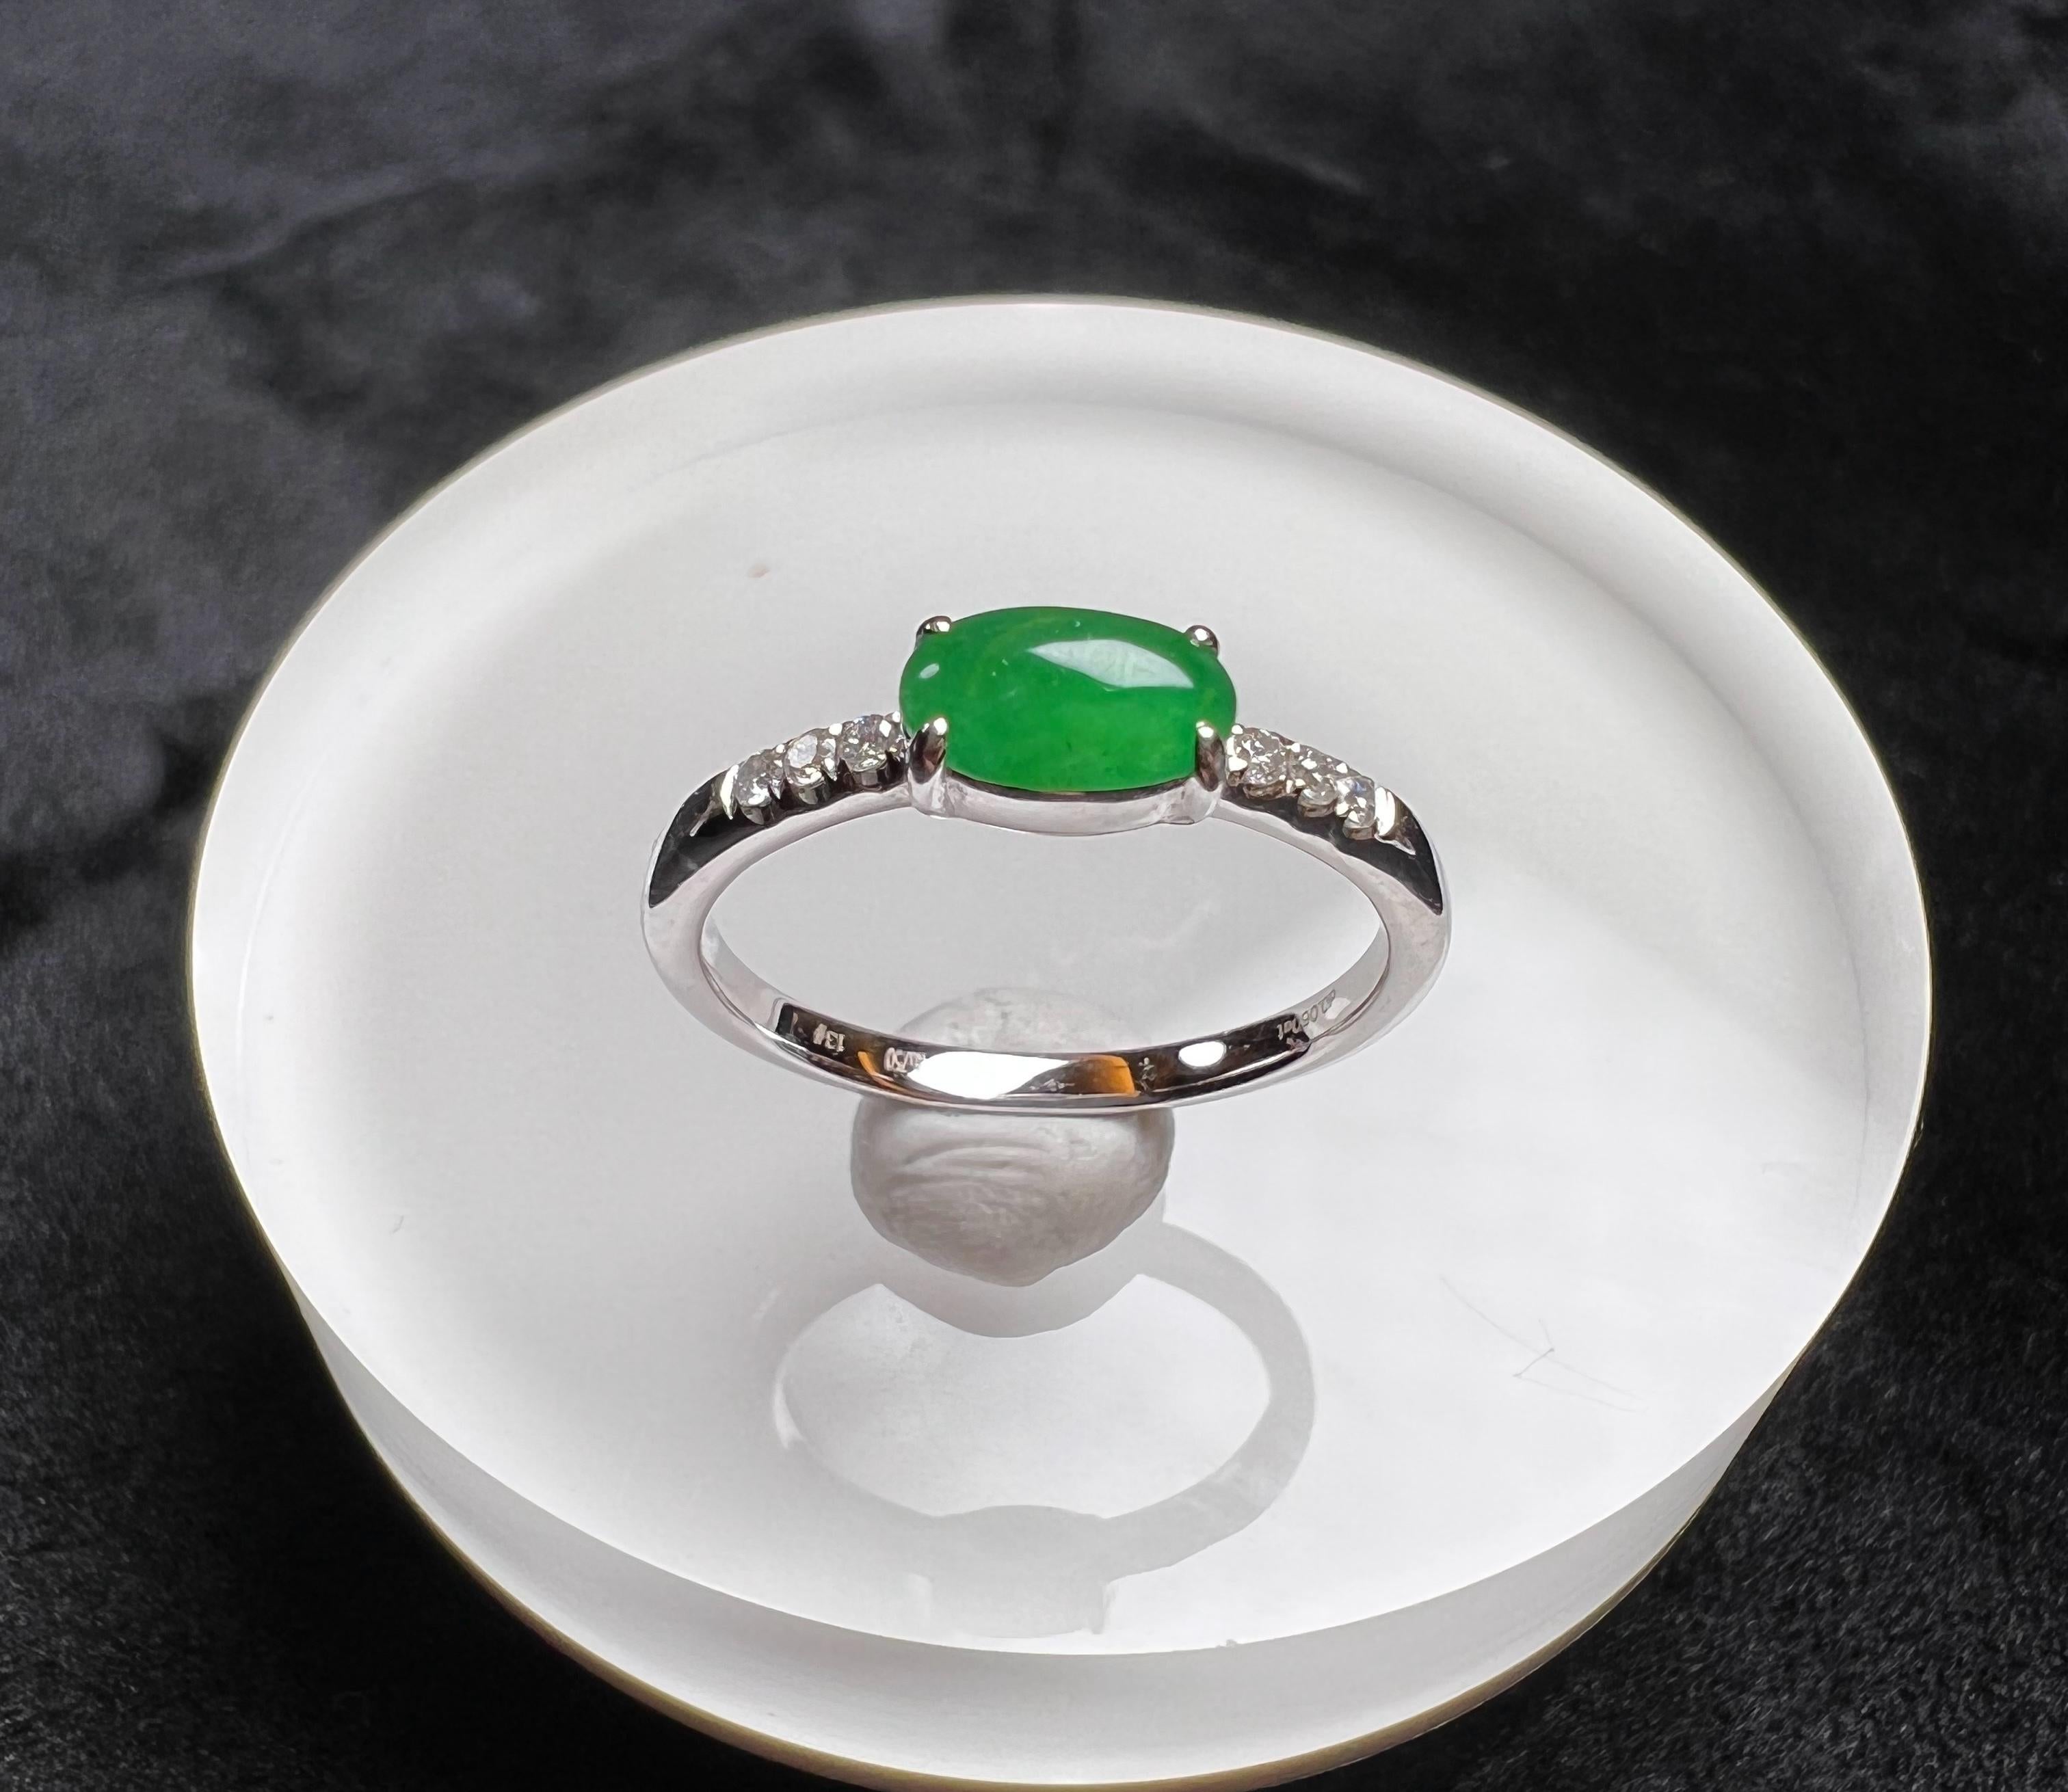 18K White Gold Oval Green Jadeite Diamond Ring, Engagement Ring

Size: M 1/2 (UK) / 6.5 (US)
Circumference (approx.): 53mm
Diameter (approx.): 16.9mm

Total weight (approx.): 2.4g
Main stone (jadeite) measurement (approx.): 7*4.1mm
Side stone